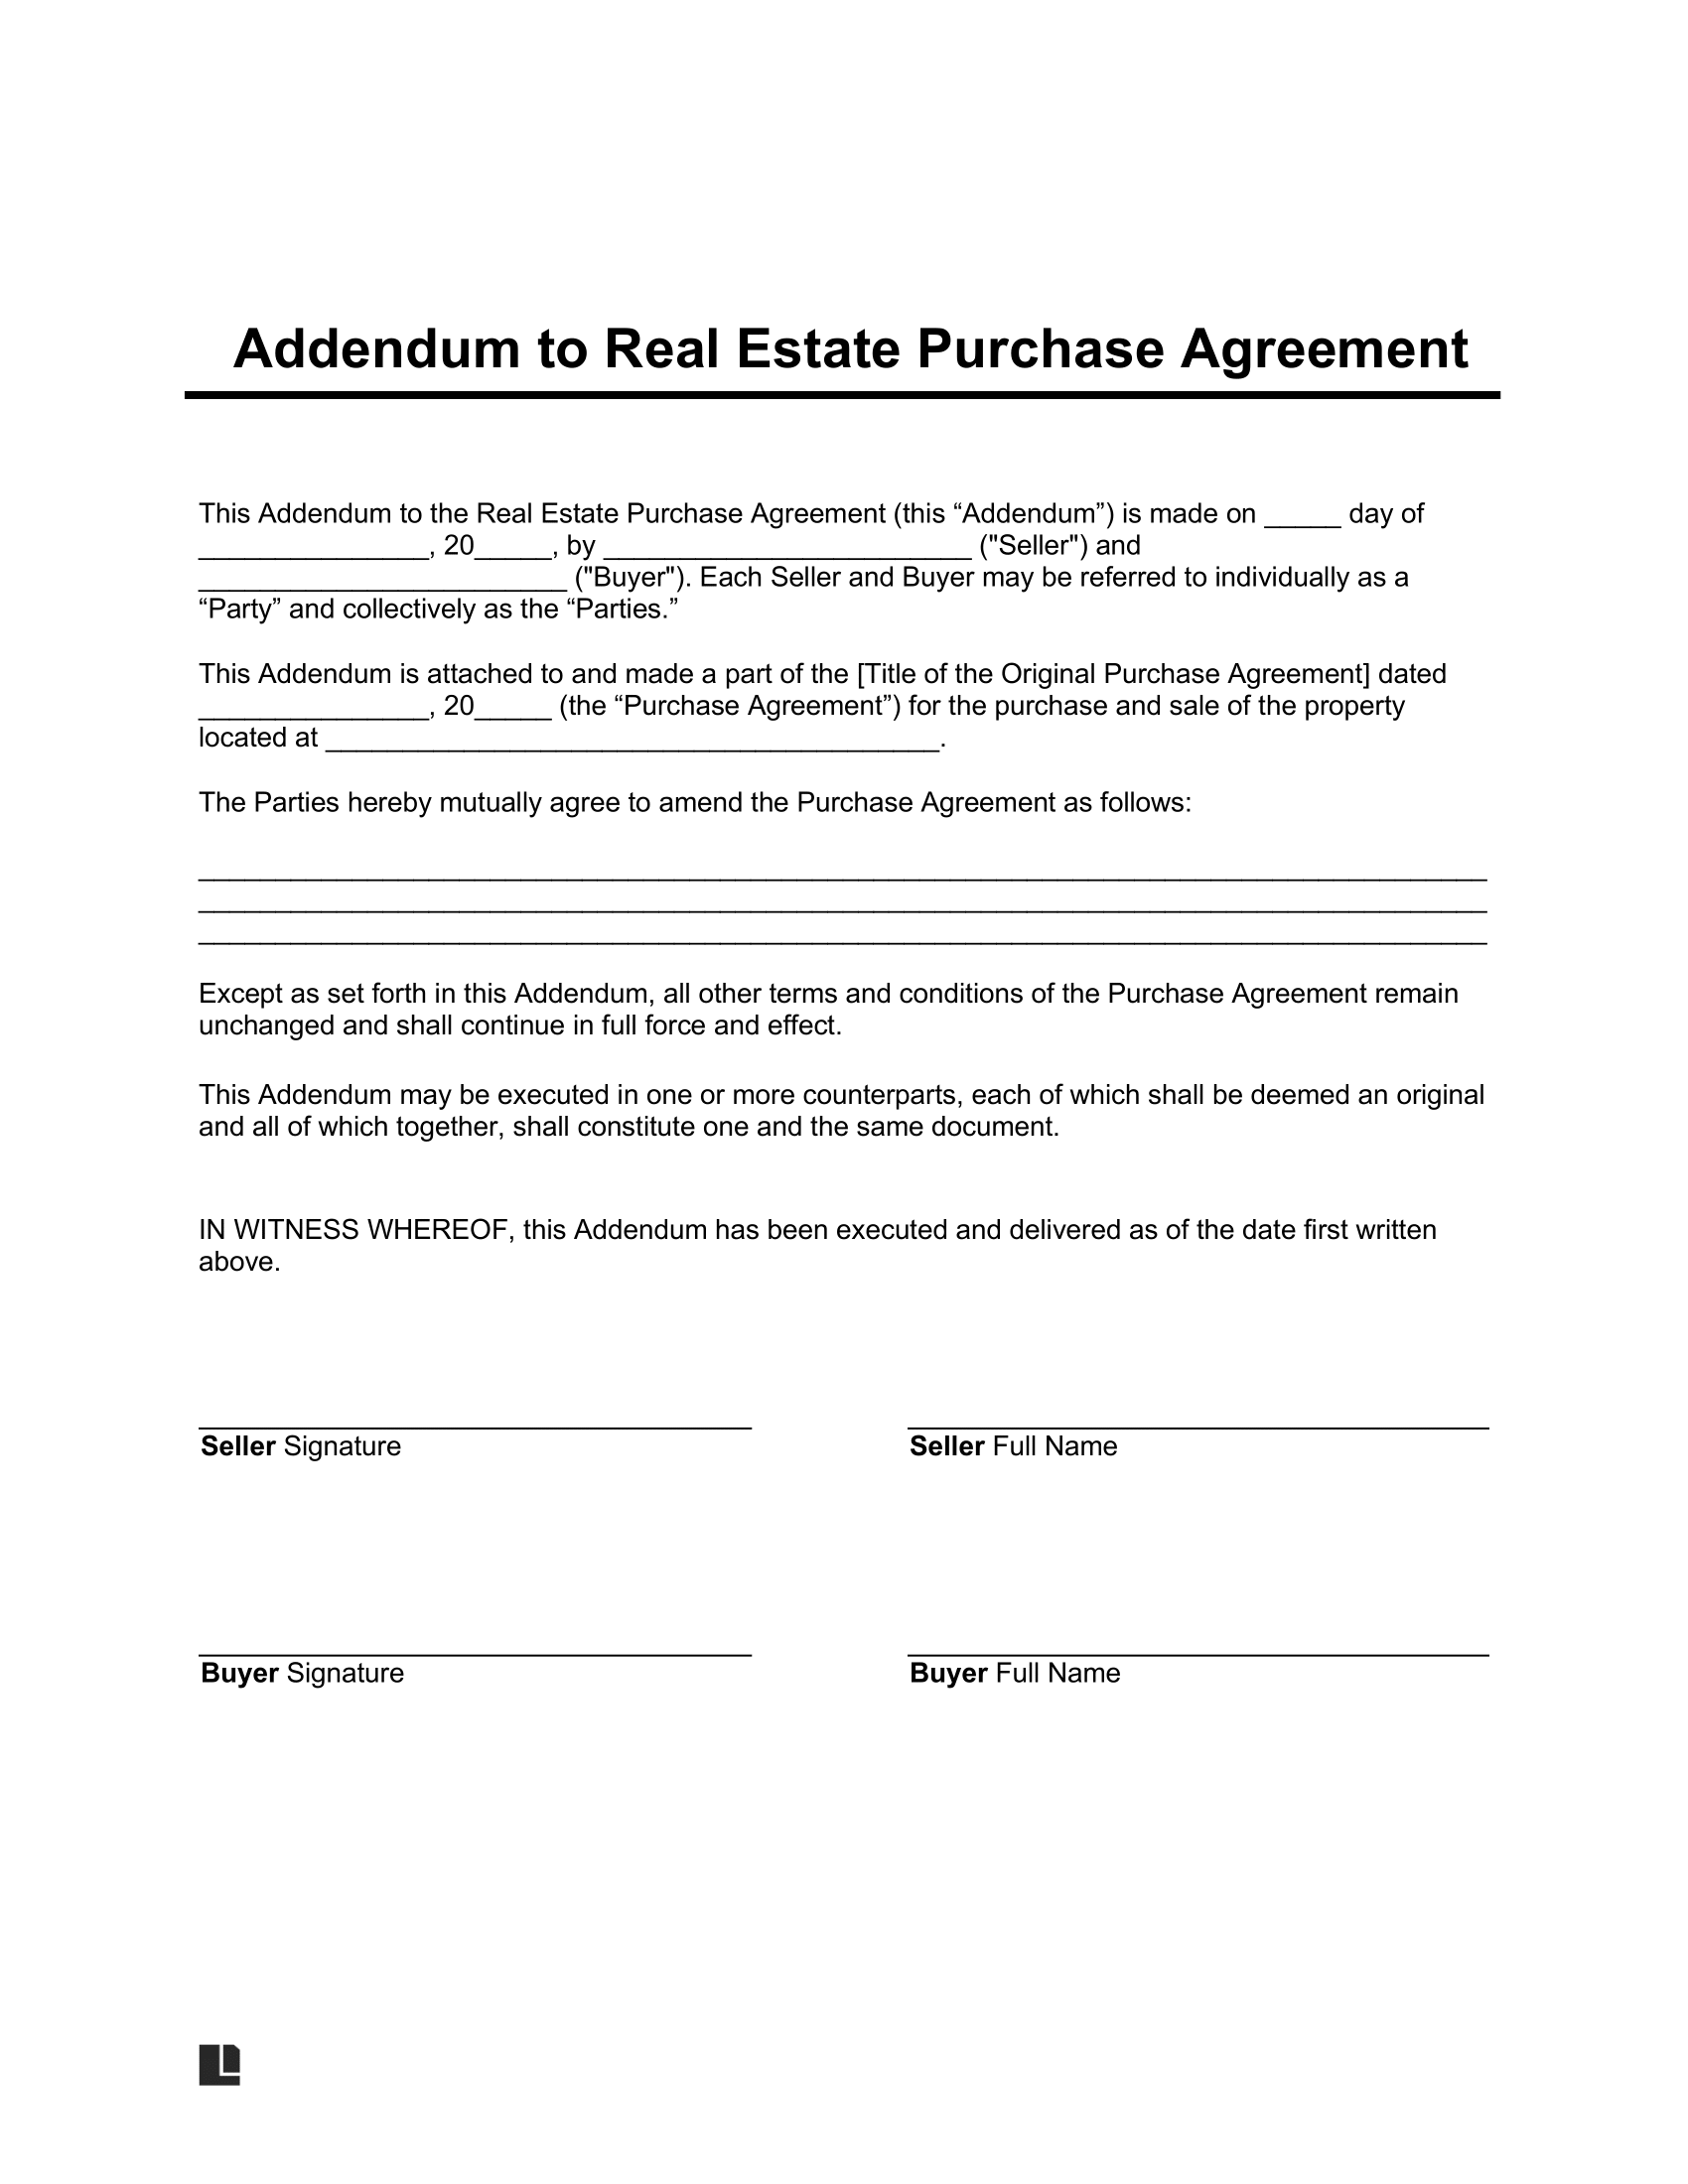 Real Estate Purchase Agreement Addendum Template